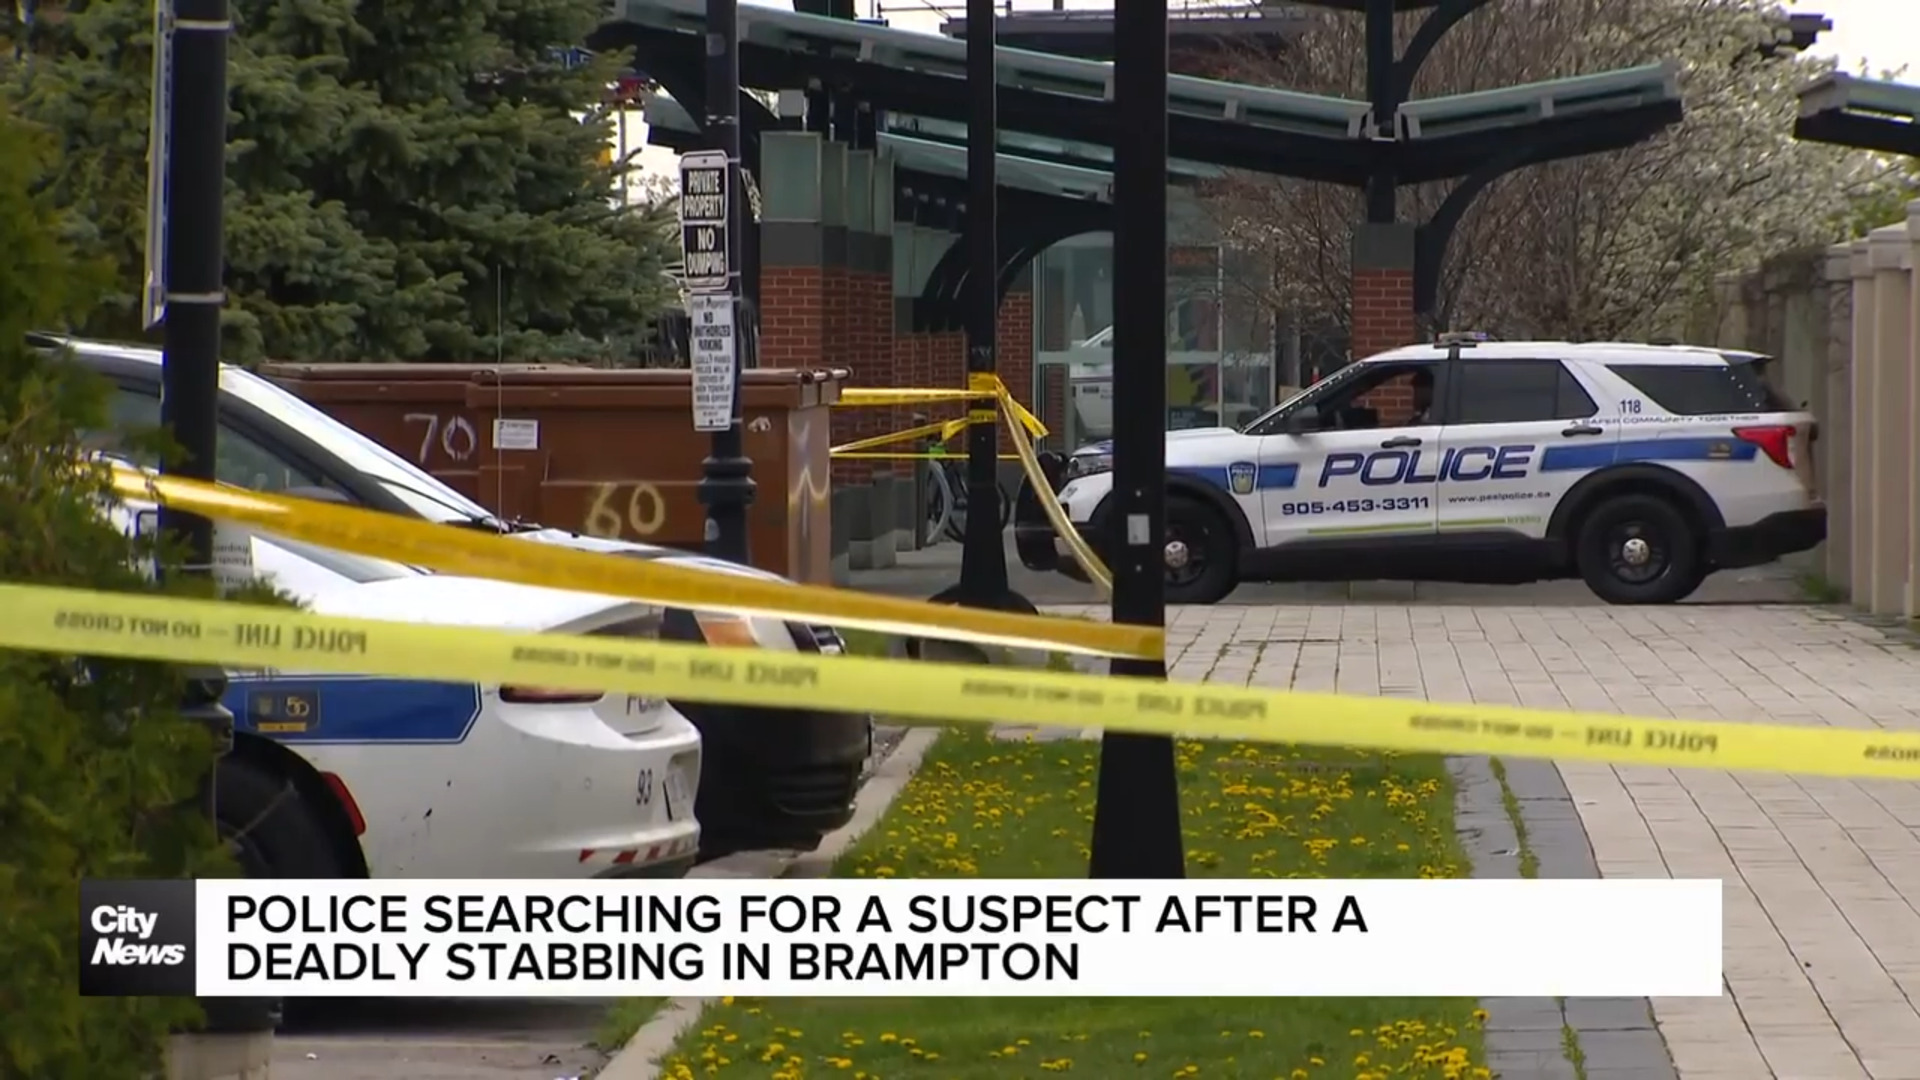 The hunt is on for a murder suspect after deadly stabbing in Brampton